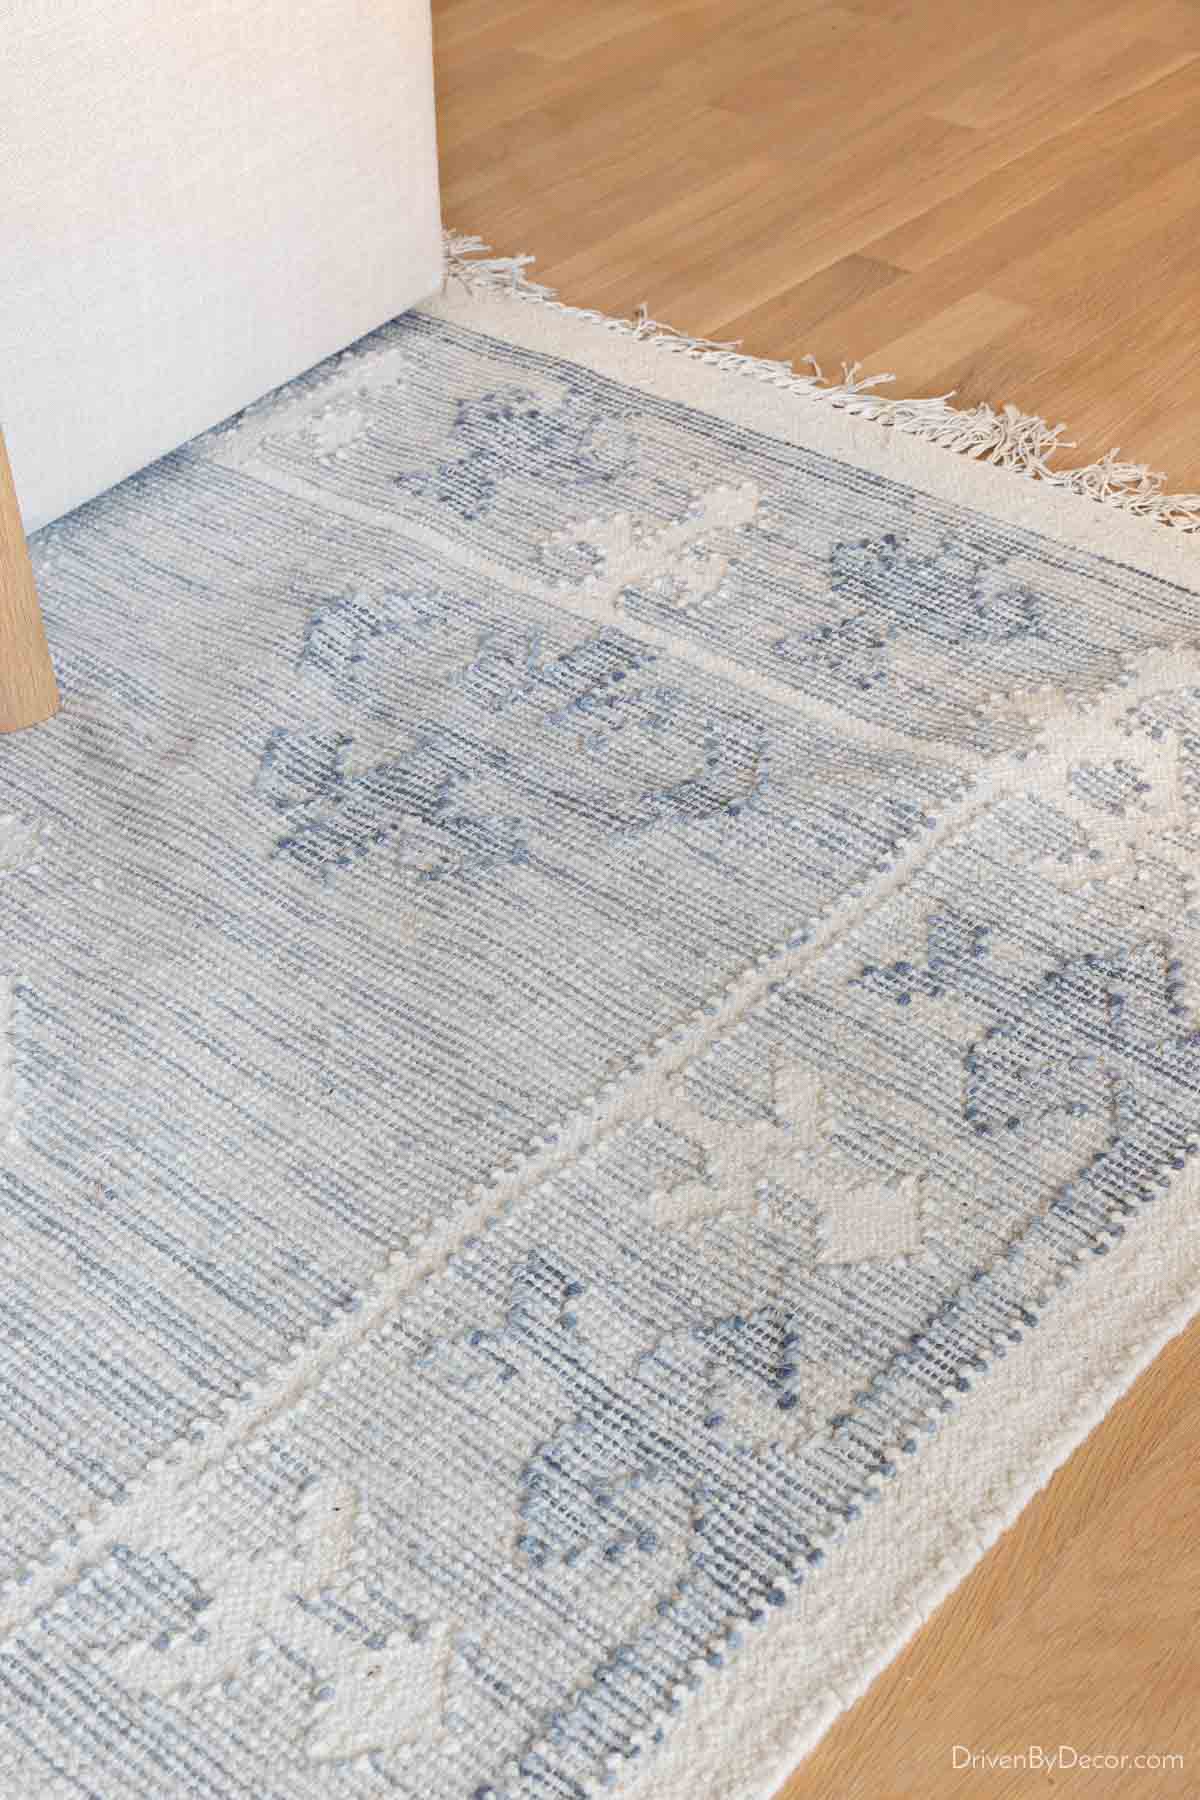 The Best Rug Pad for Every Floor Type - Driven by Decor